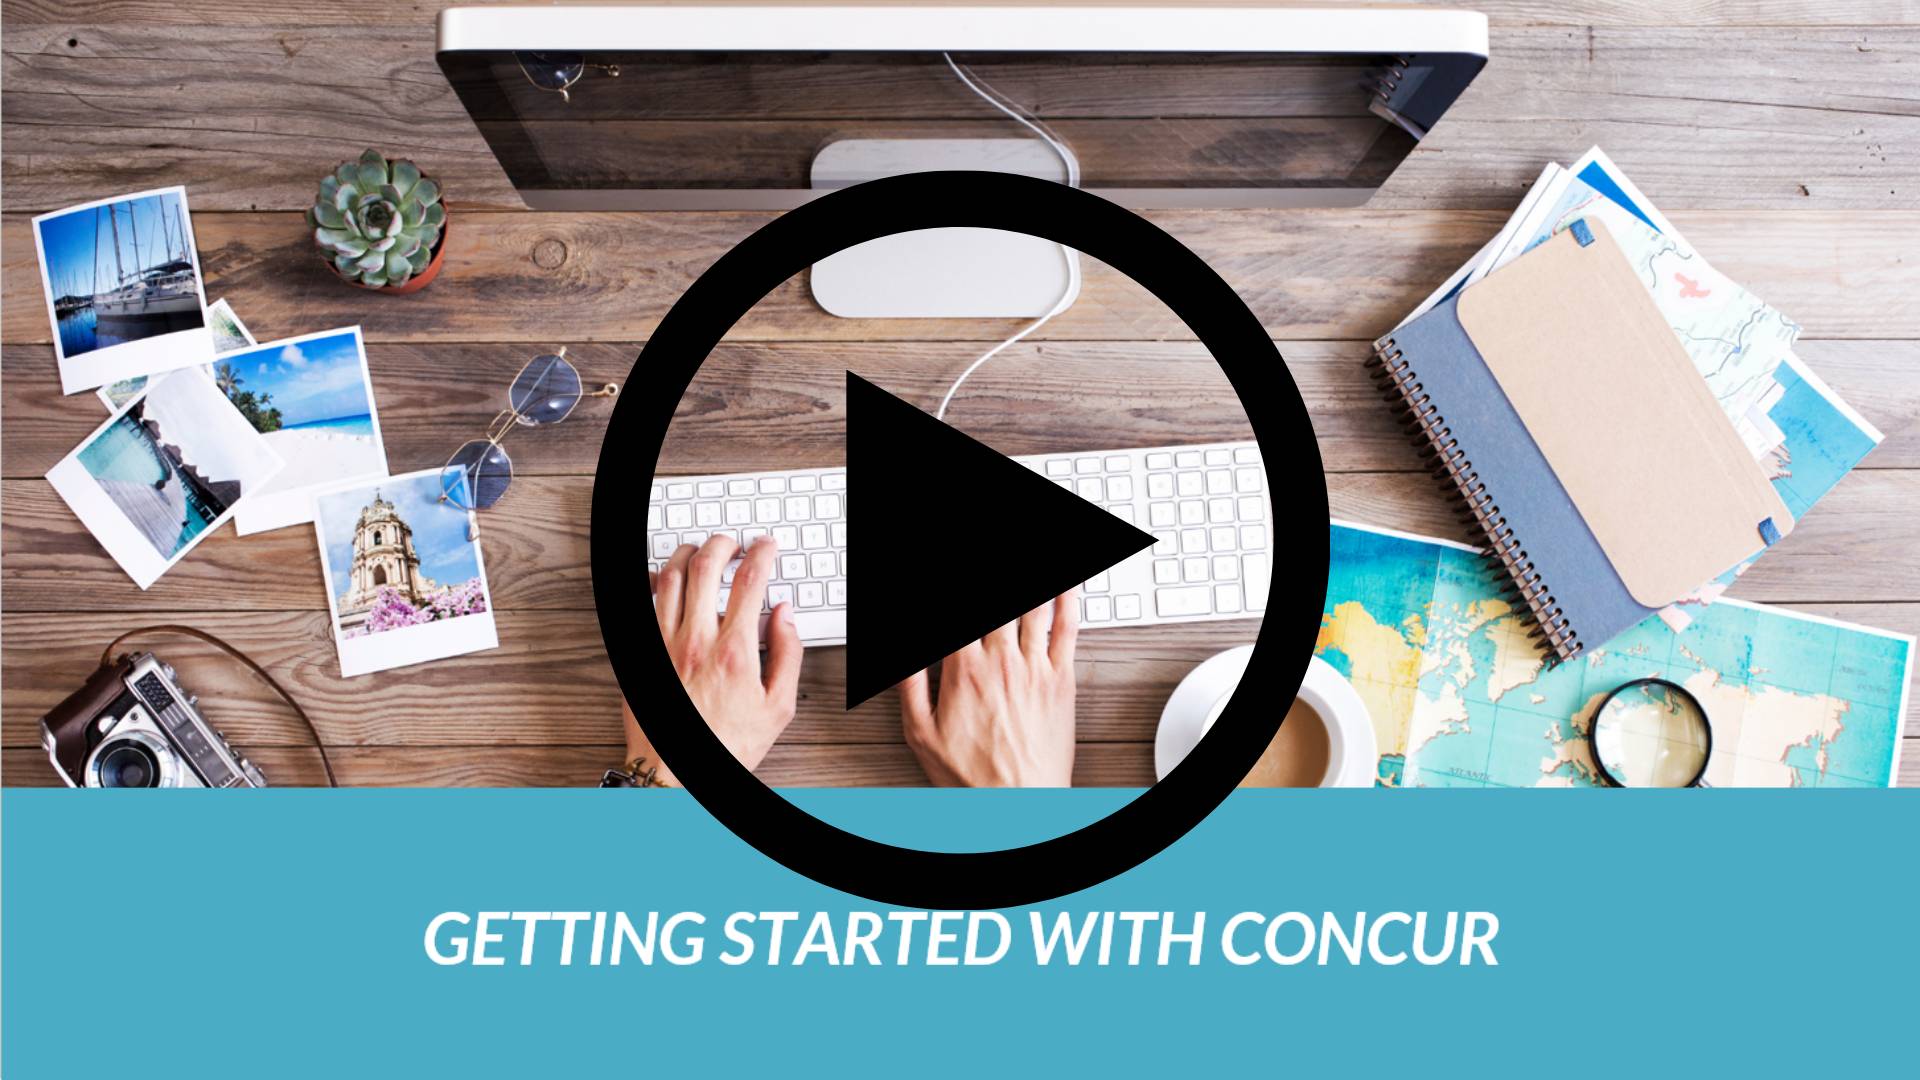 Play the Concur Intro Video